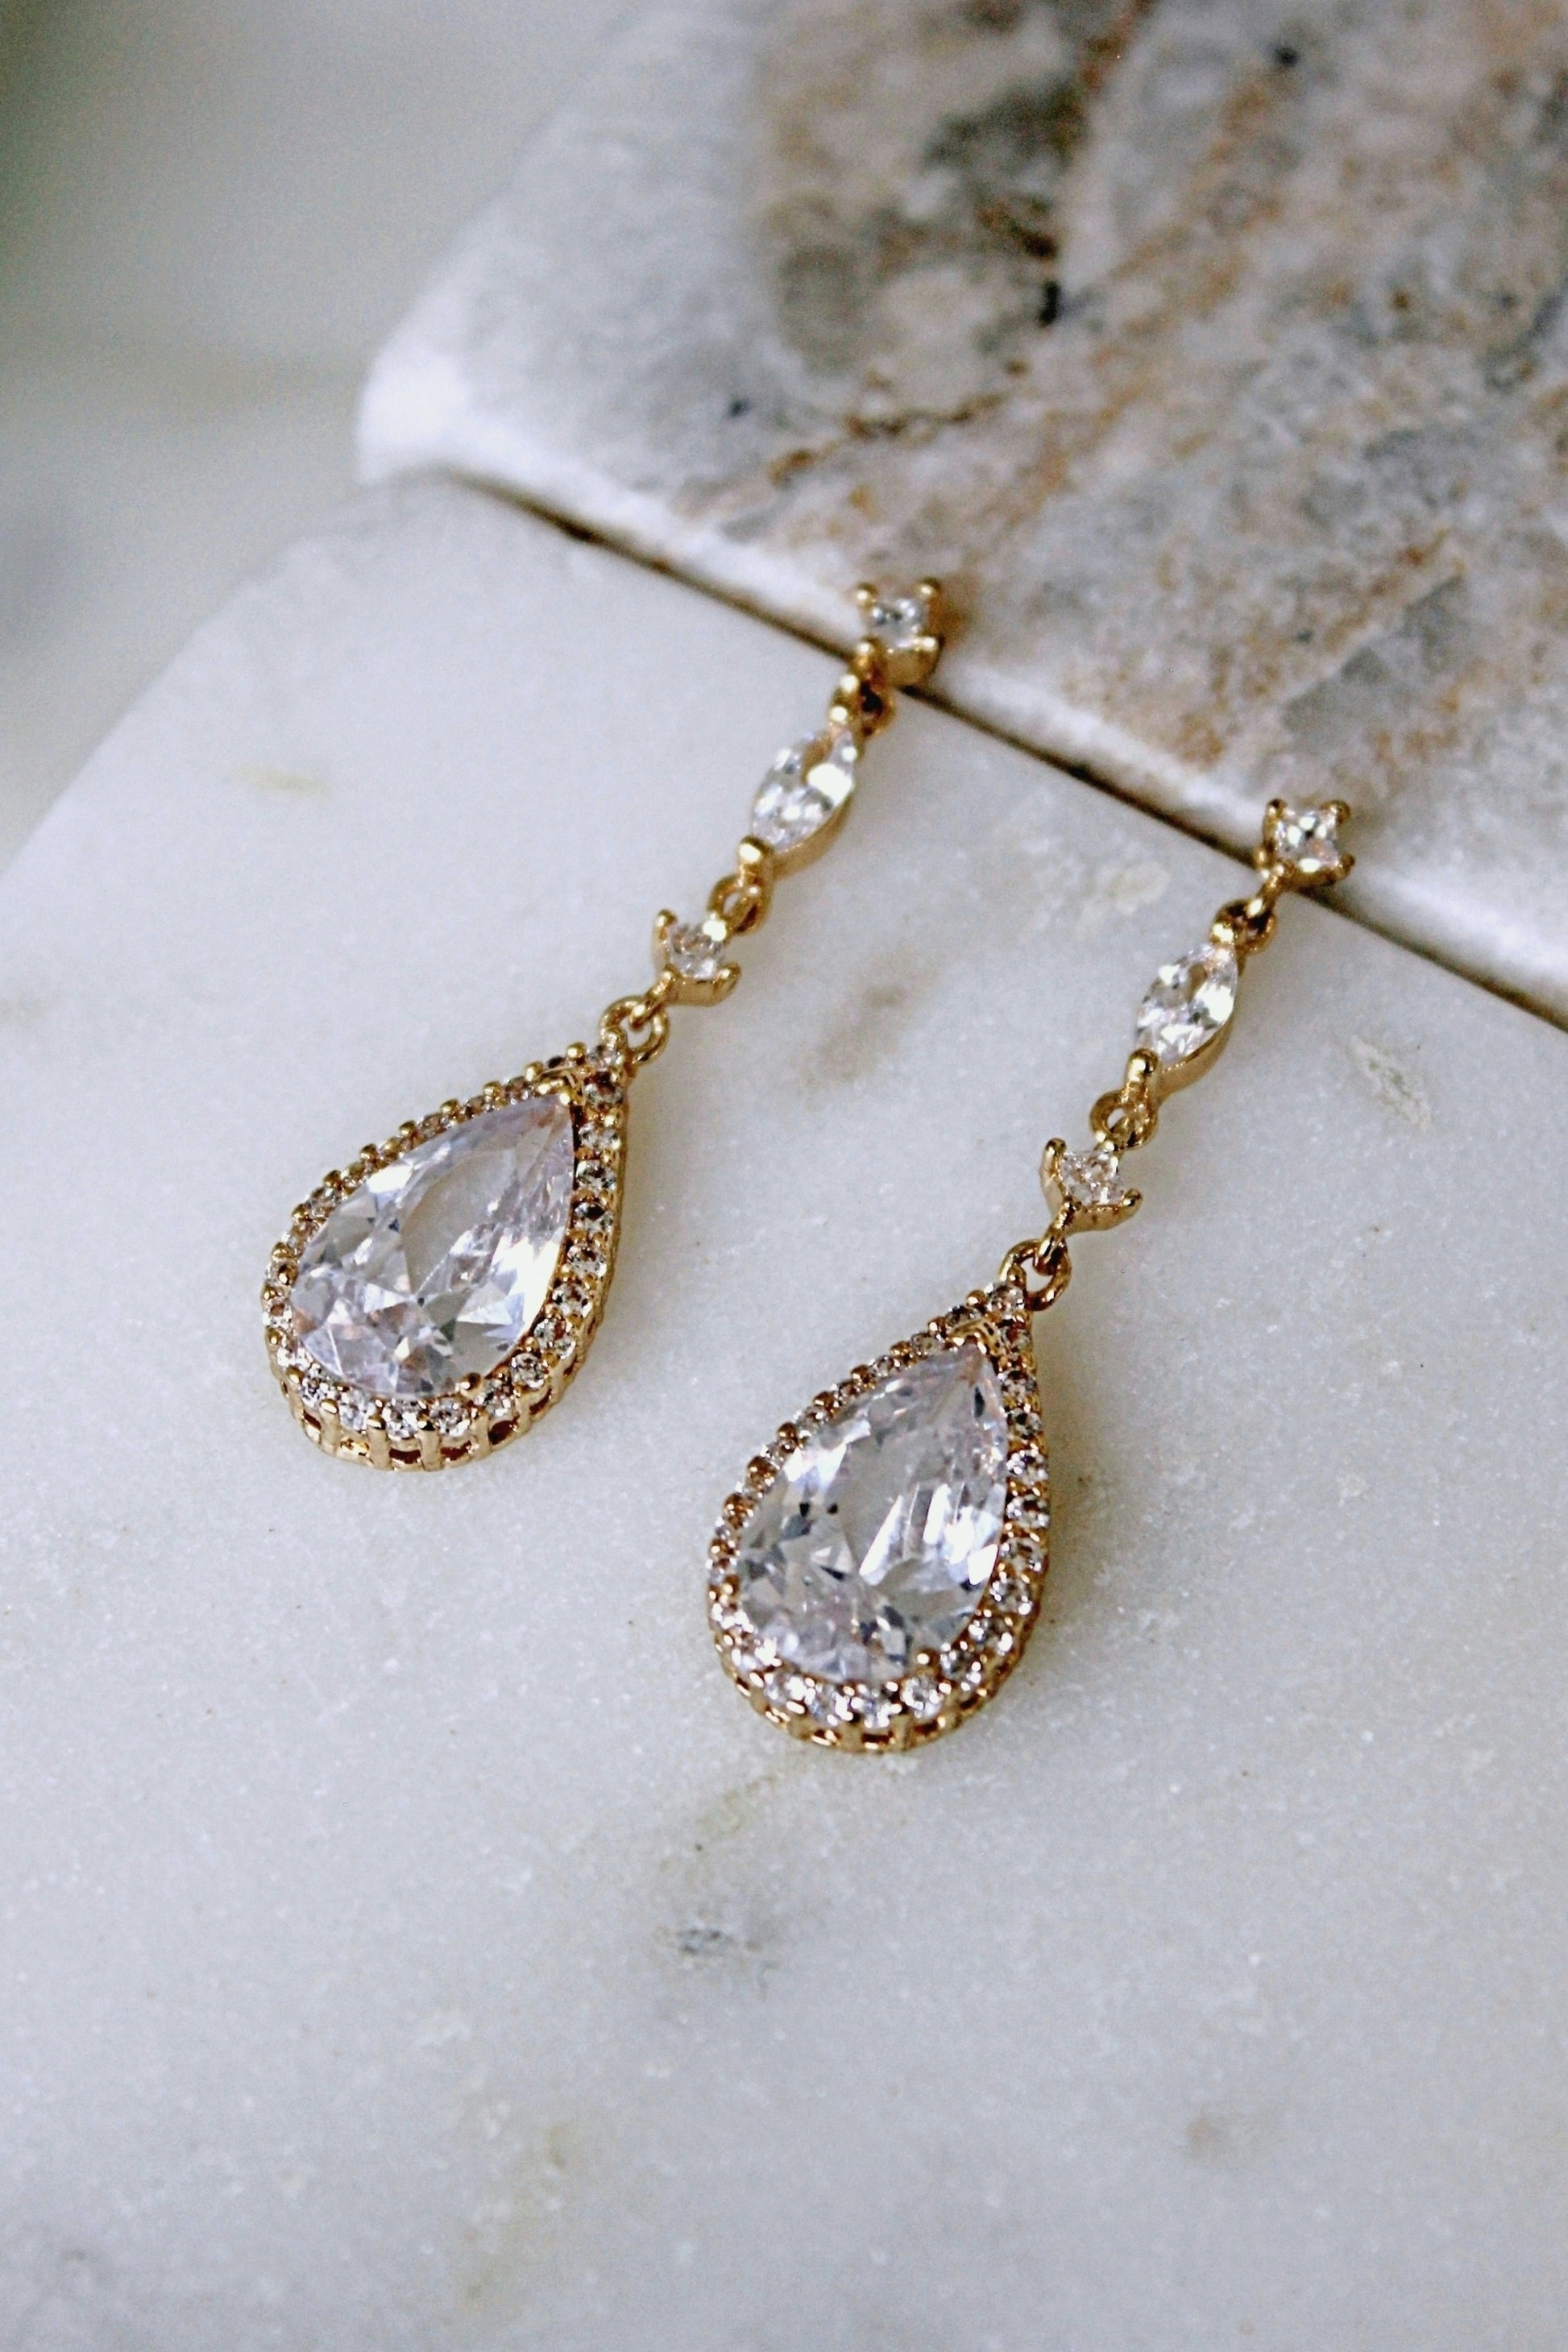 Gold Earrings Long Dangle Crystal Earrings Tear Drop Art Deco Chandelier Earrings Cubic Zirconia Elegant Bridal Earrings Bridesmaid, BIJOU EARRINGS for Her, for Bride, for Bridesmaid, for Mother of the Bride or for Guest by Camilla Christine Bridal Jewelry and Wedding Accessories and Special Occasion